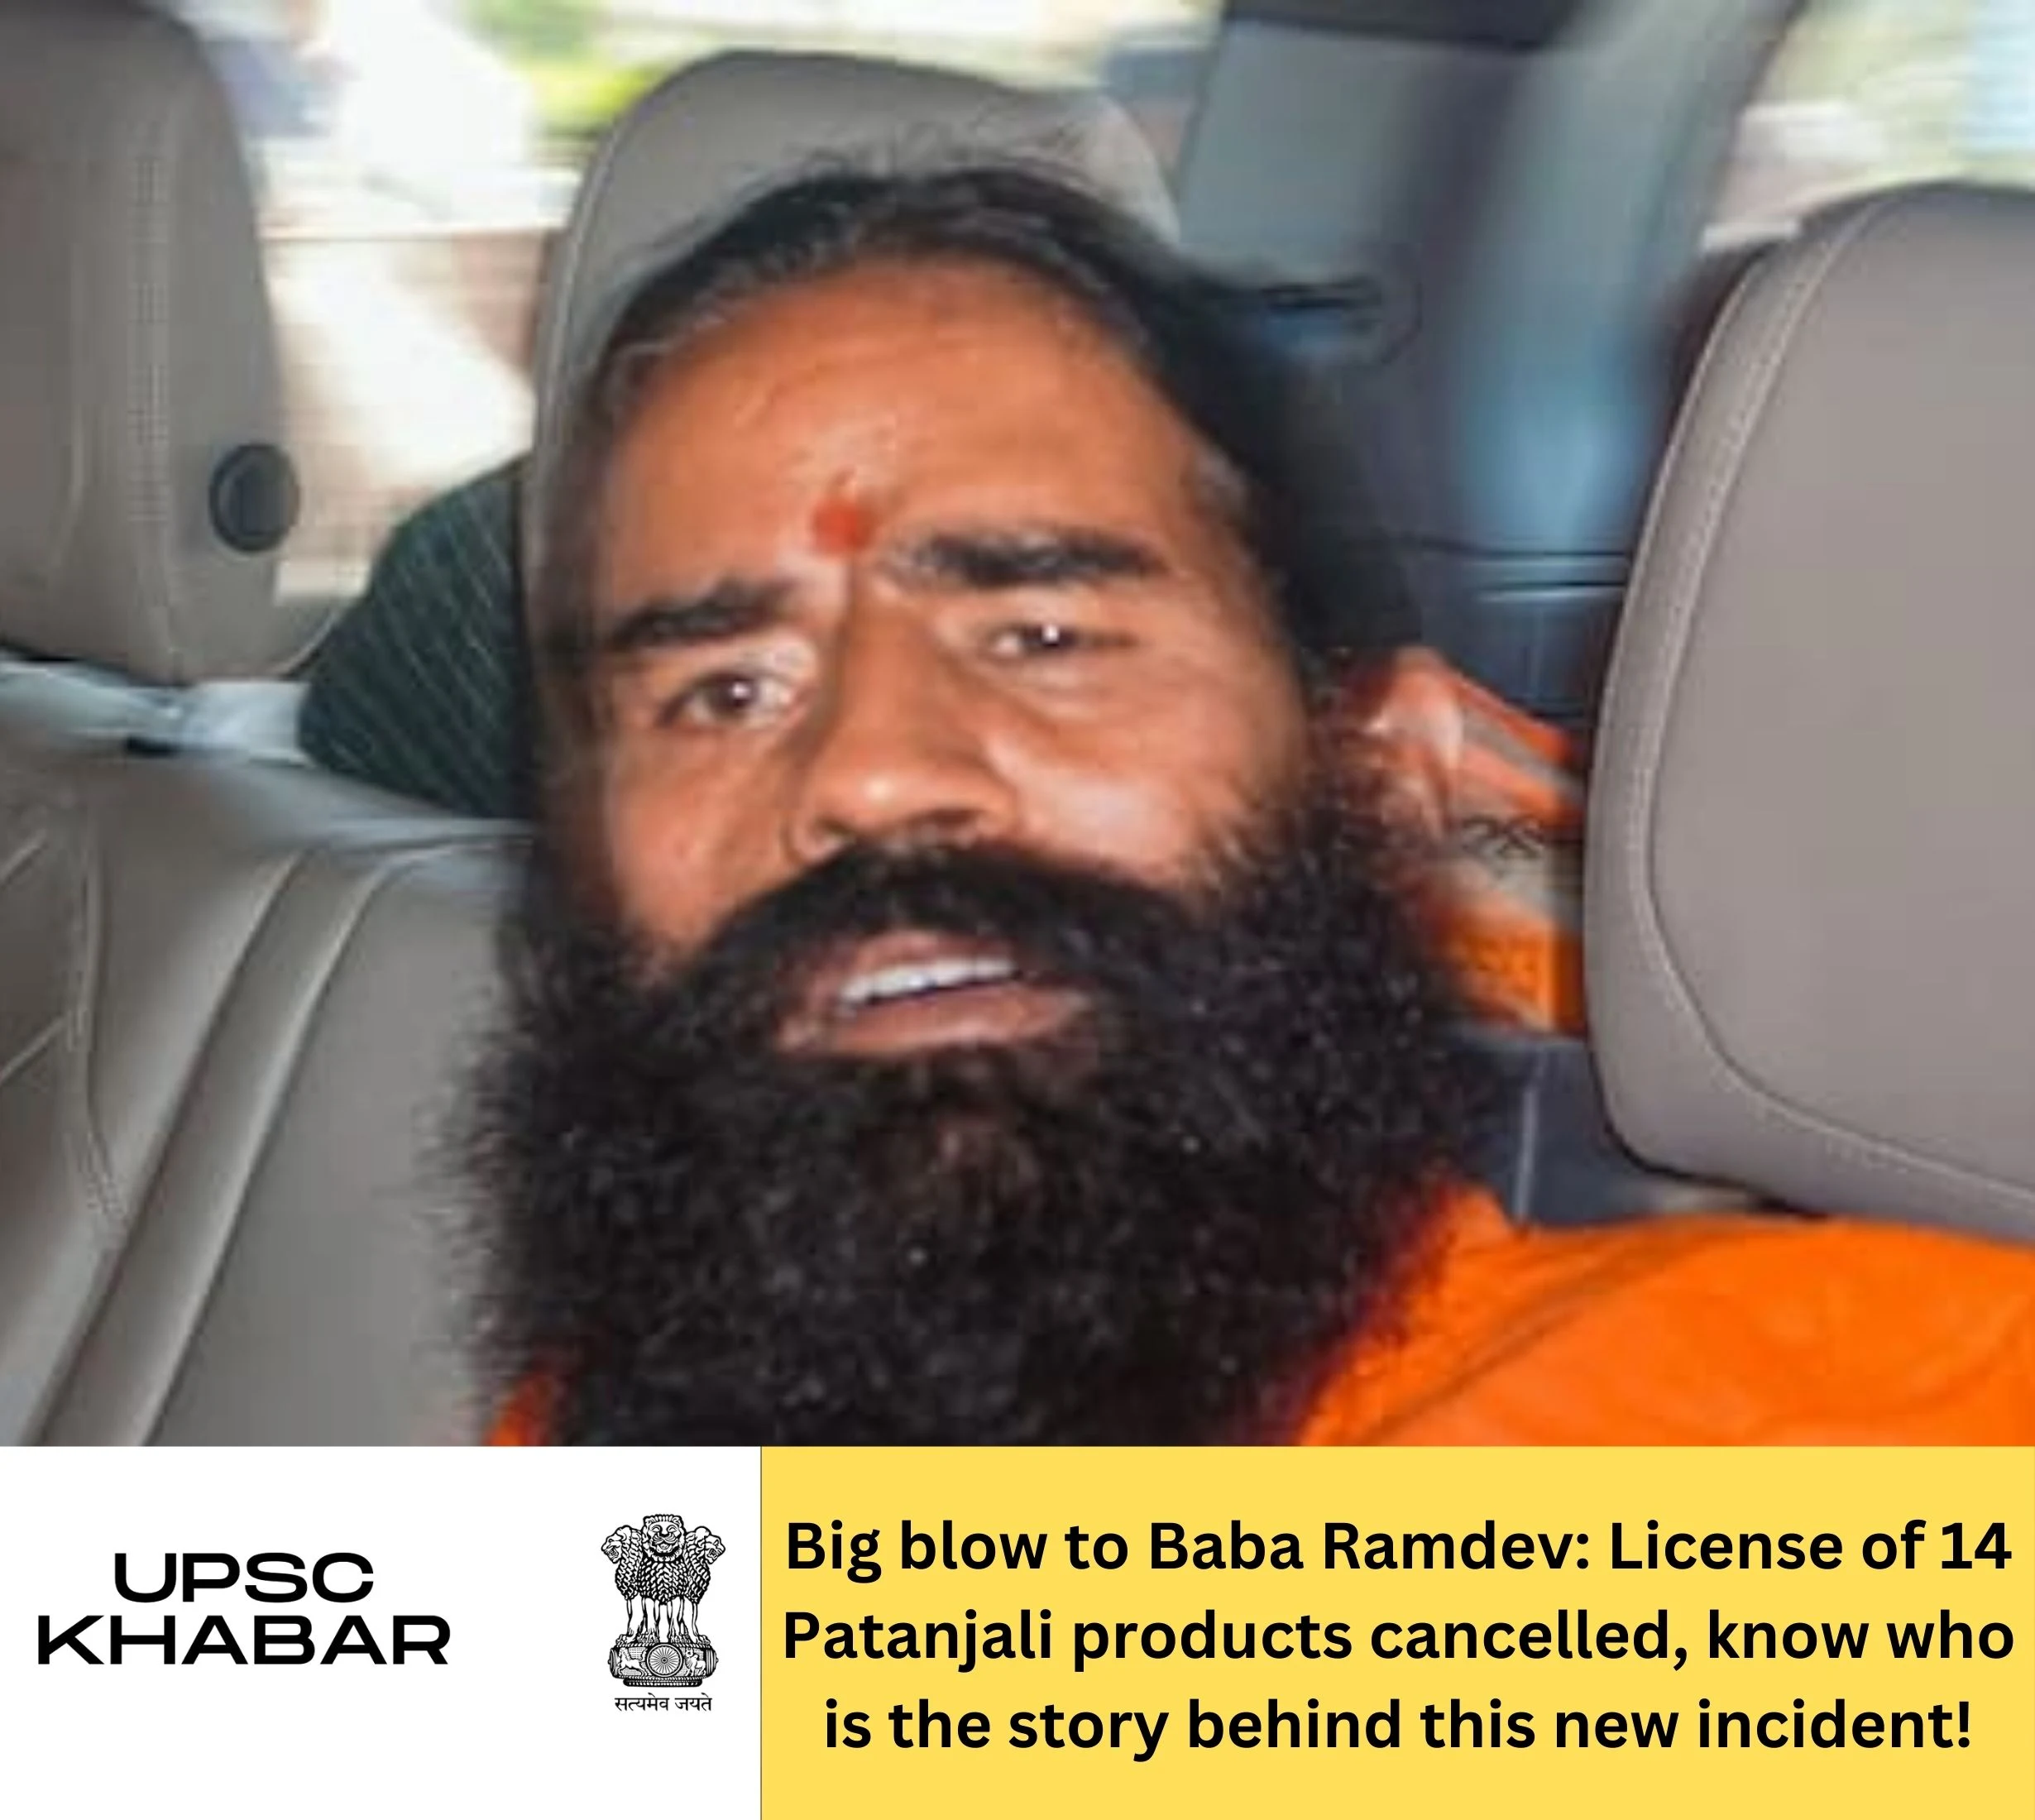 Big blow to Baba Ramdev: License of 14 Patanjali products cancelled, know who is the story behind this new incident!